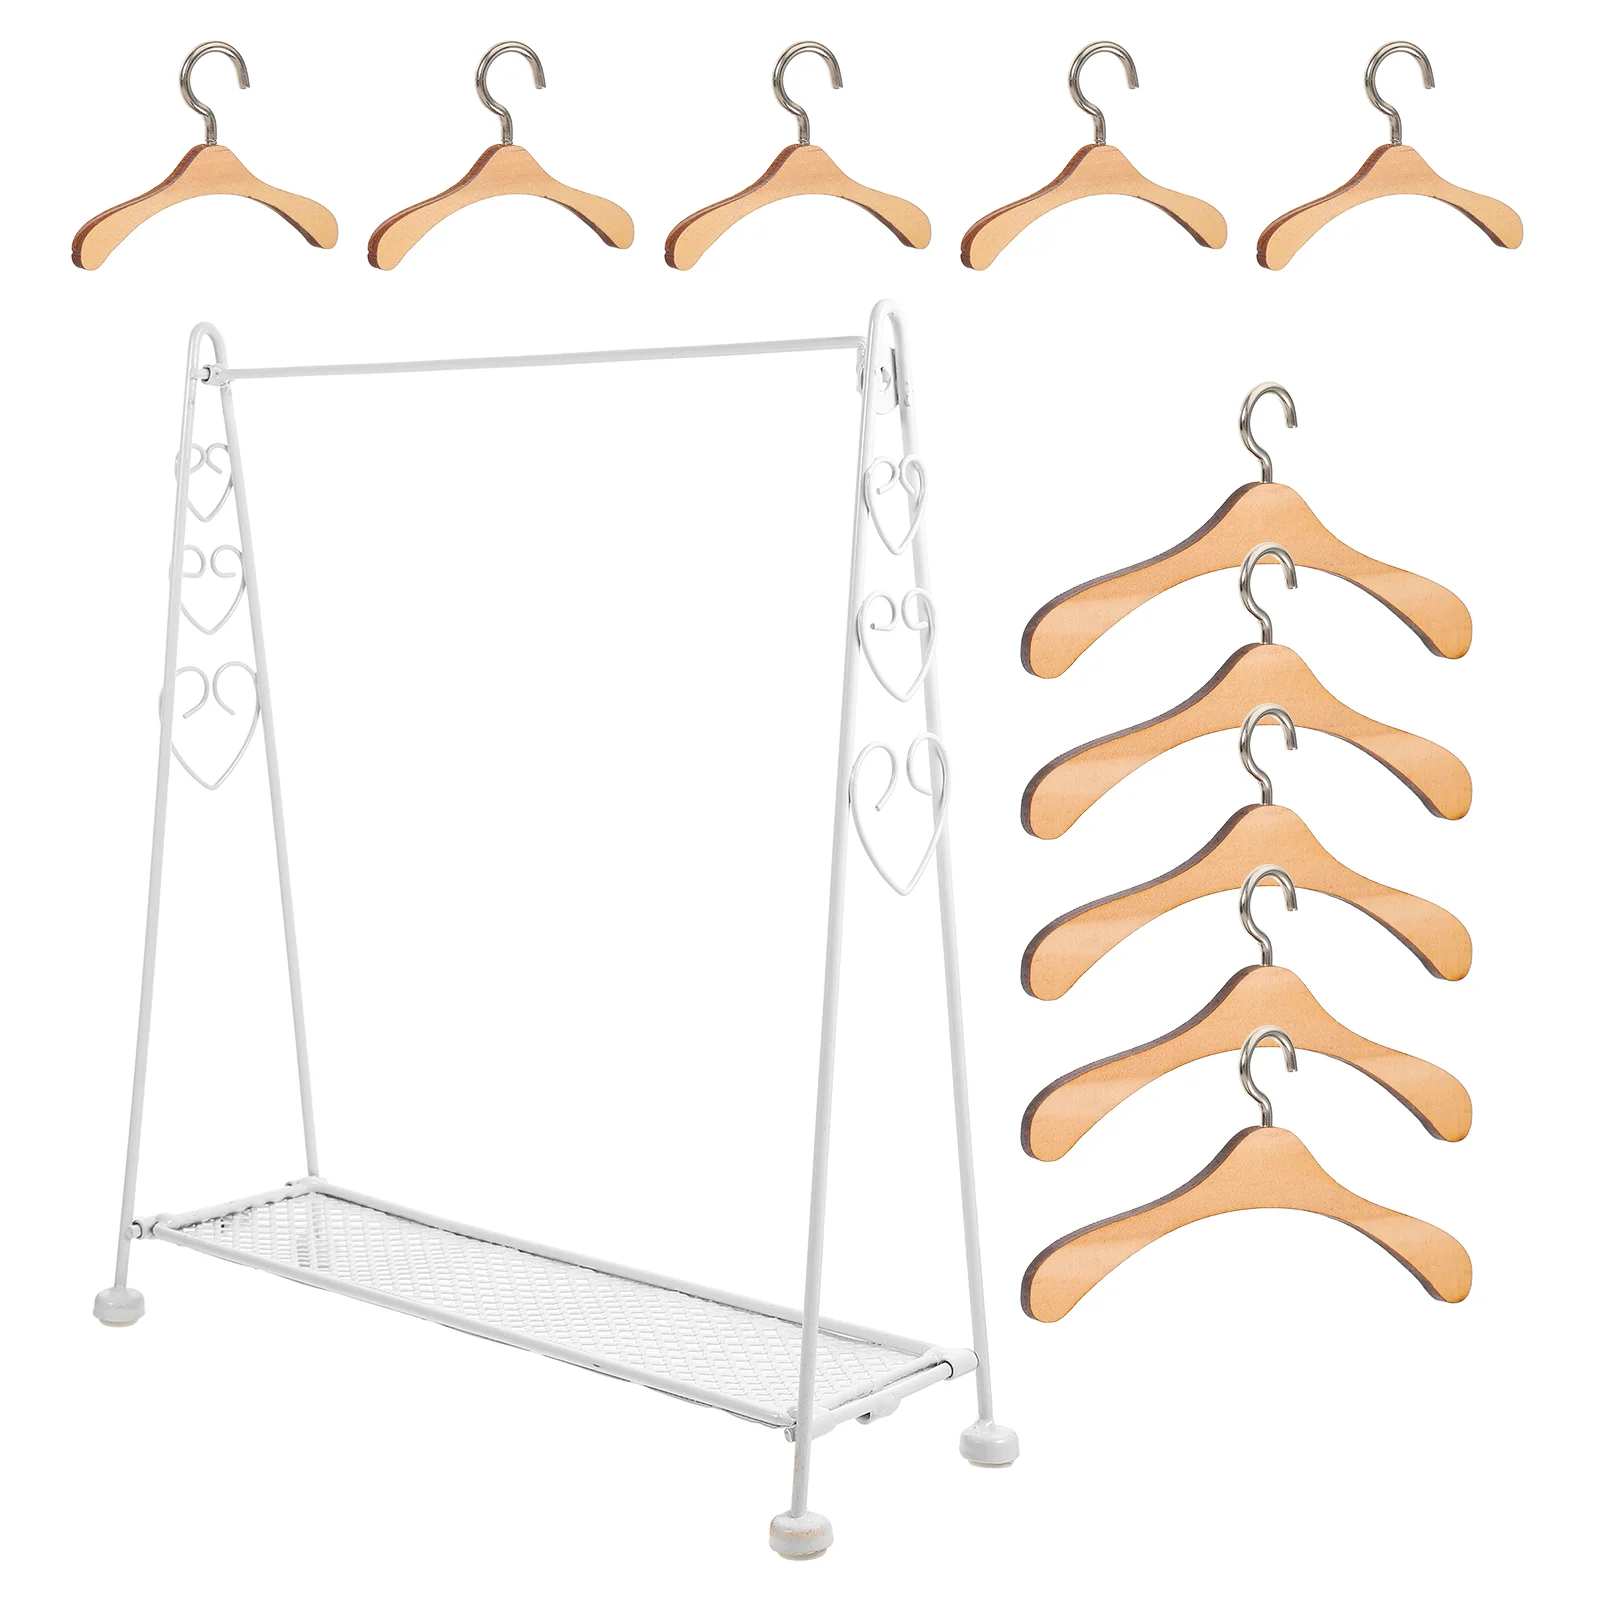 Doll Garment Rack Wood Hangers Miniature Clothes Rack Doll Apparel Clothes Hangers Dollhouse Dress Outfit Wardrobe doll wig wood stand for 1 2 1 3 1 4 1 6 1 12 1 8 doll wigs doll hair display holder wood stand rack